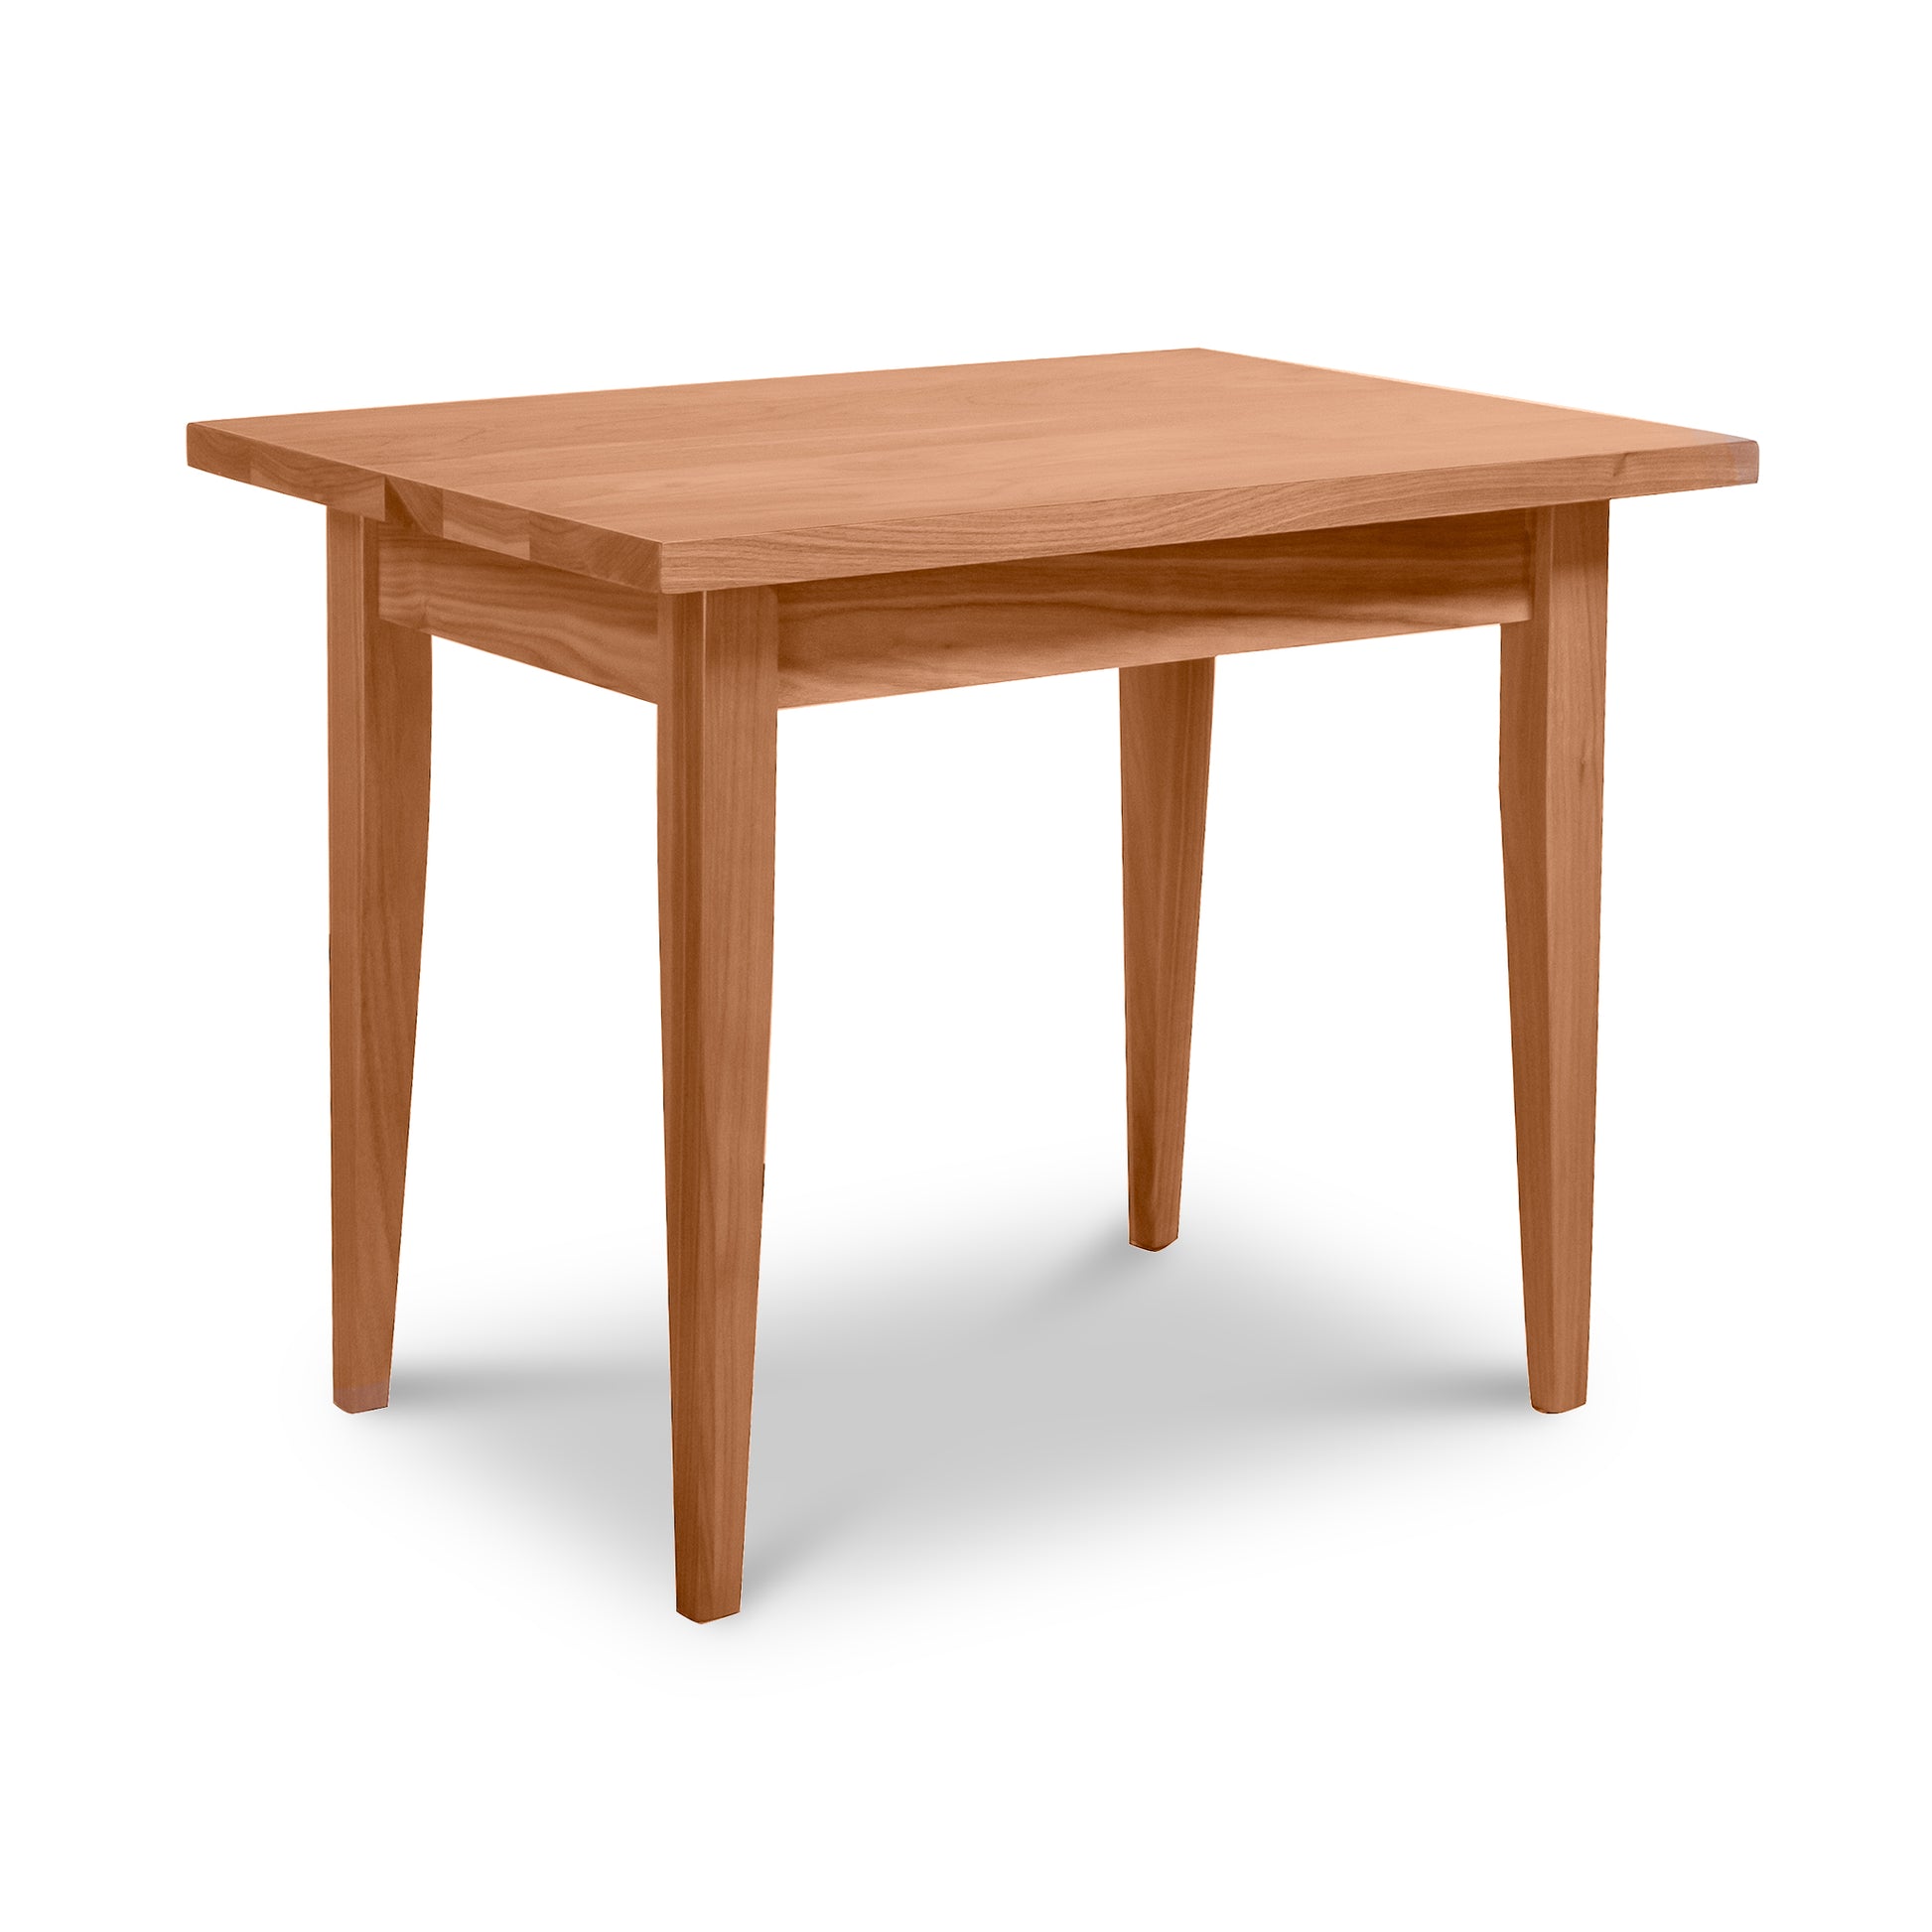 A Lyndon Furniture Classic Shaker end table with two wooden legs on a white background.